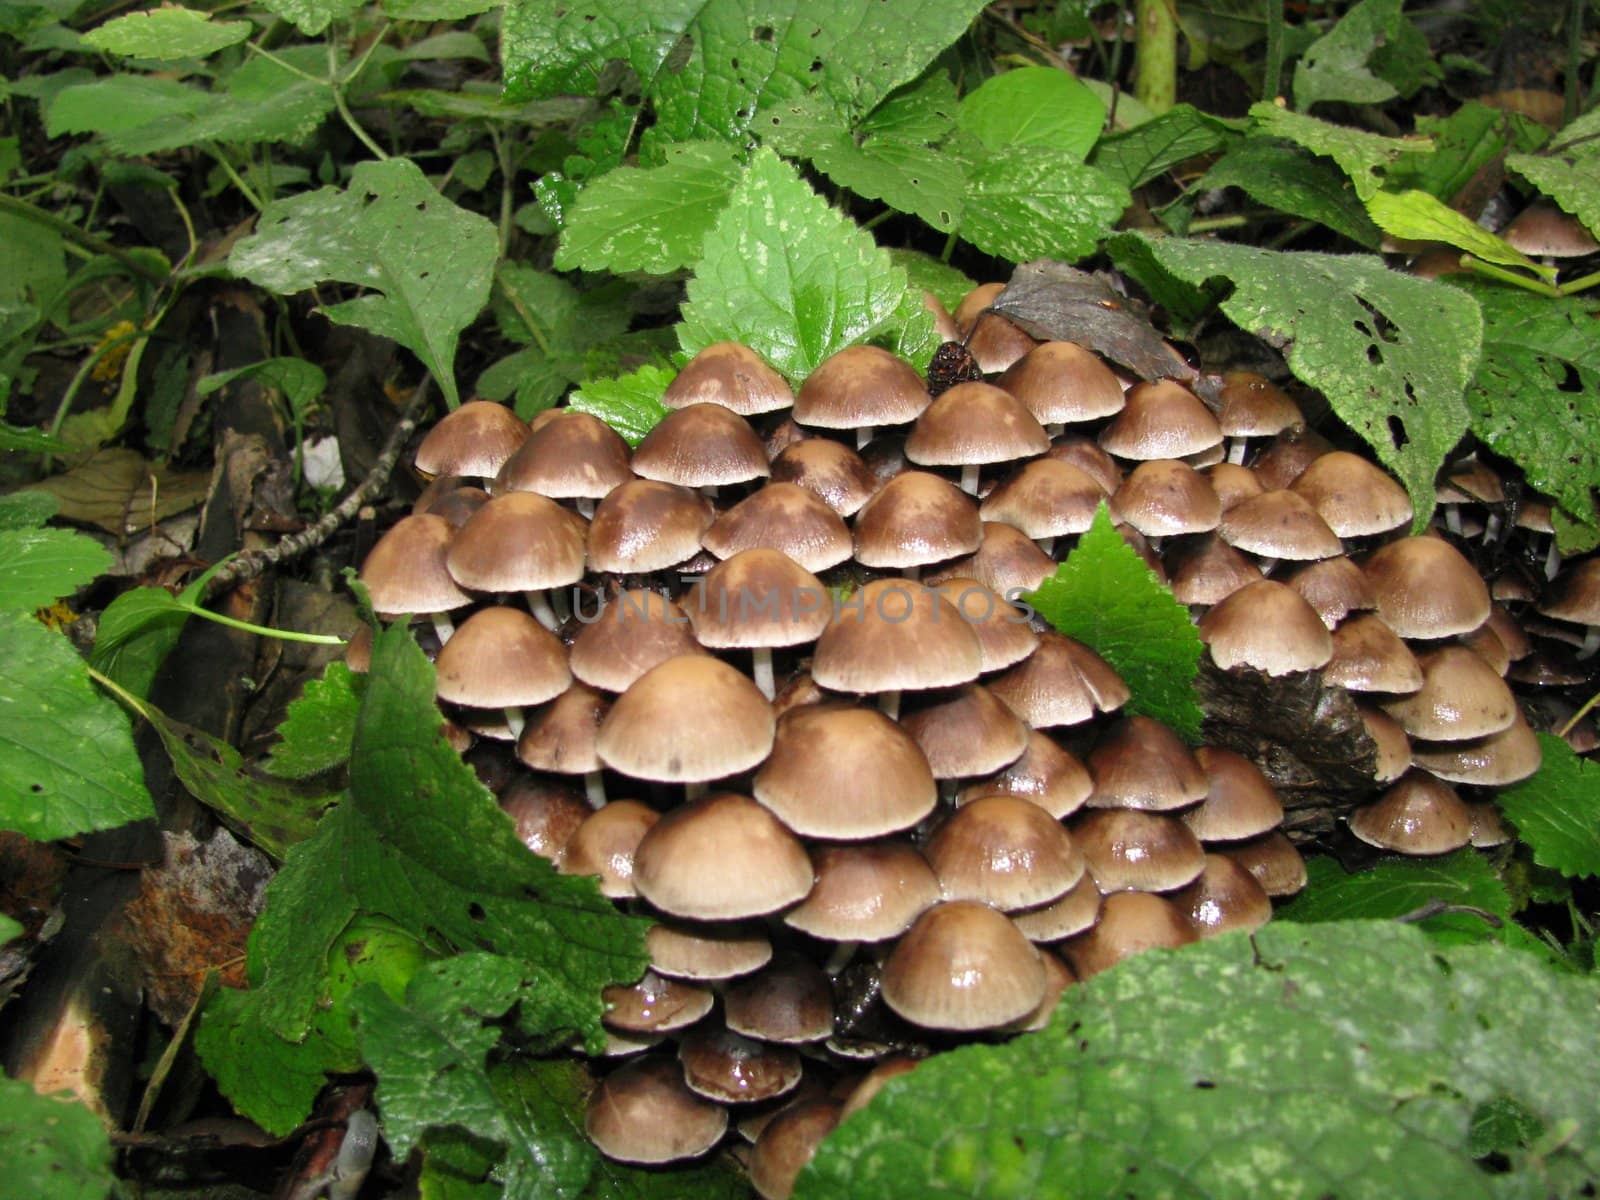 Mushrooms, wood, hats, leaves, foliage, poison, dew, a background, a kind, the nature, flora, vegetation, a plant, inedible